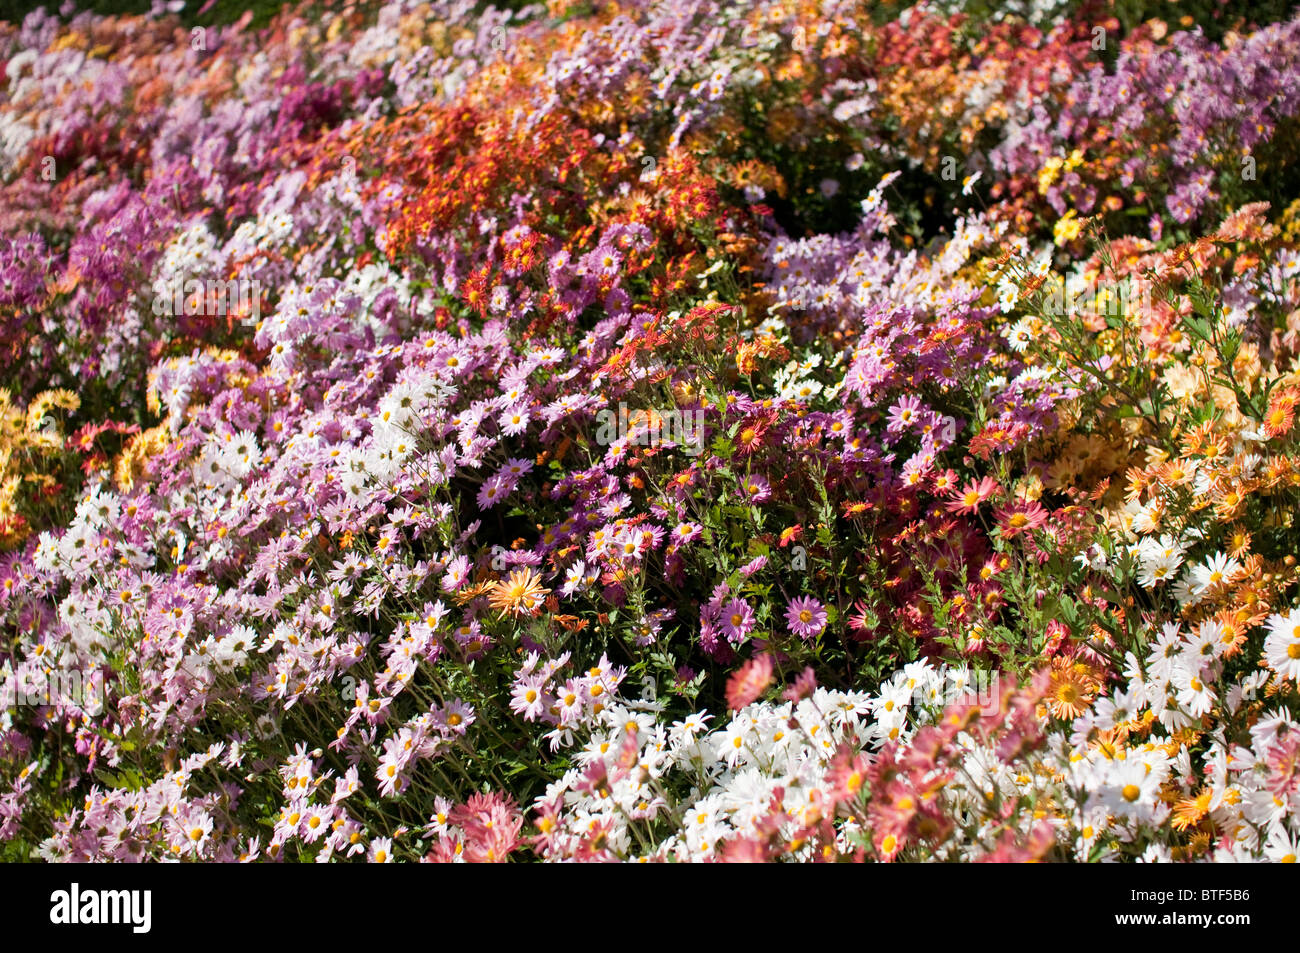 Garden bed full of colorful Chrysanthemums (Mums) in October, a popular fall flower in the United States. Stock Photo